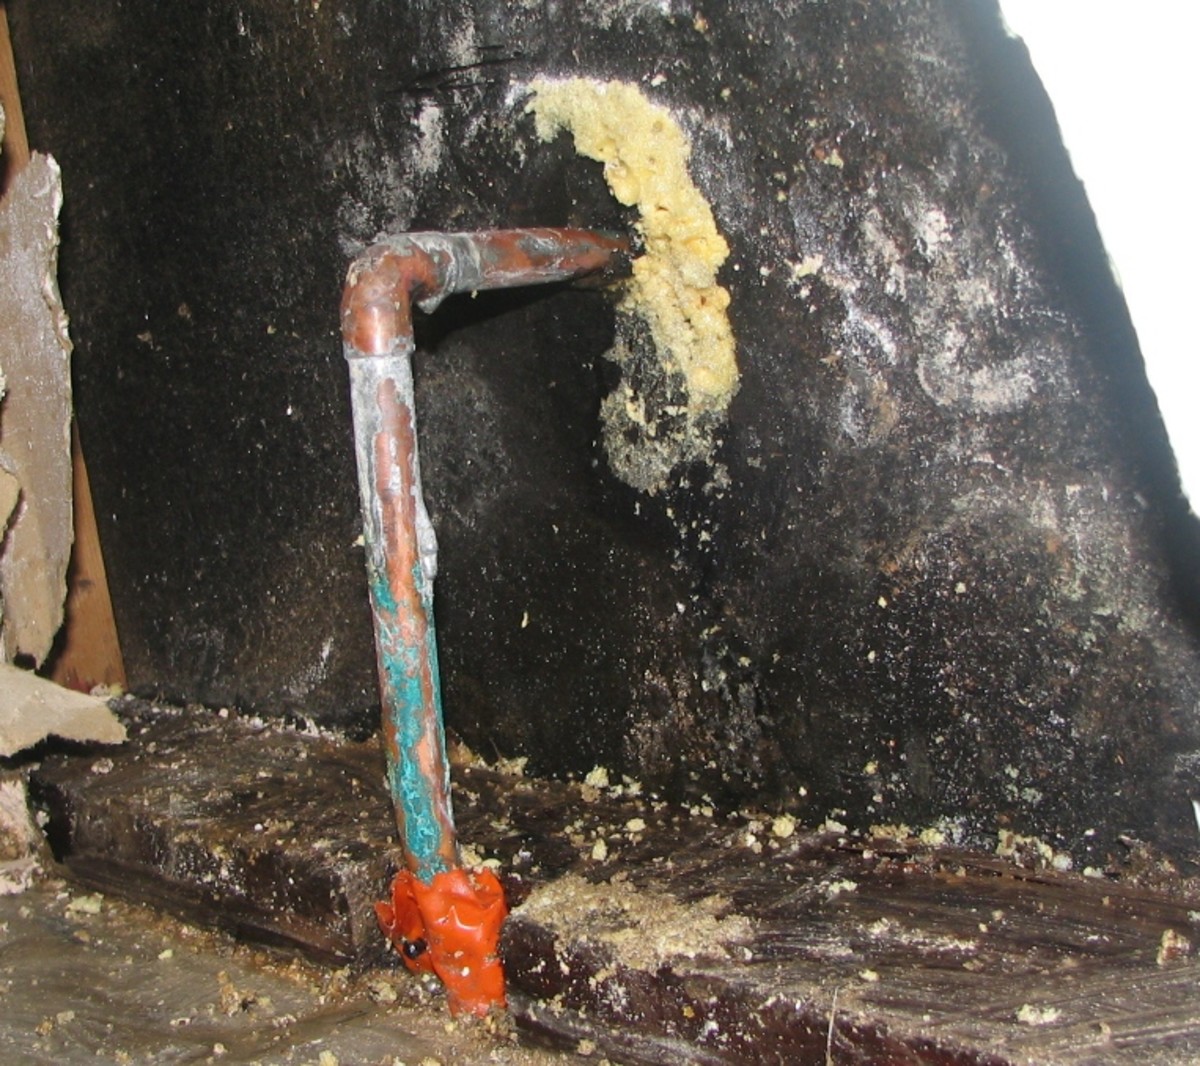 Using valves in piping assemblies allows you to shut off fluid flow when a leak is found, preventing damage like this.